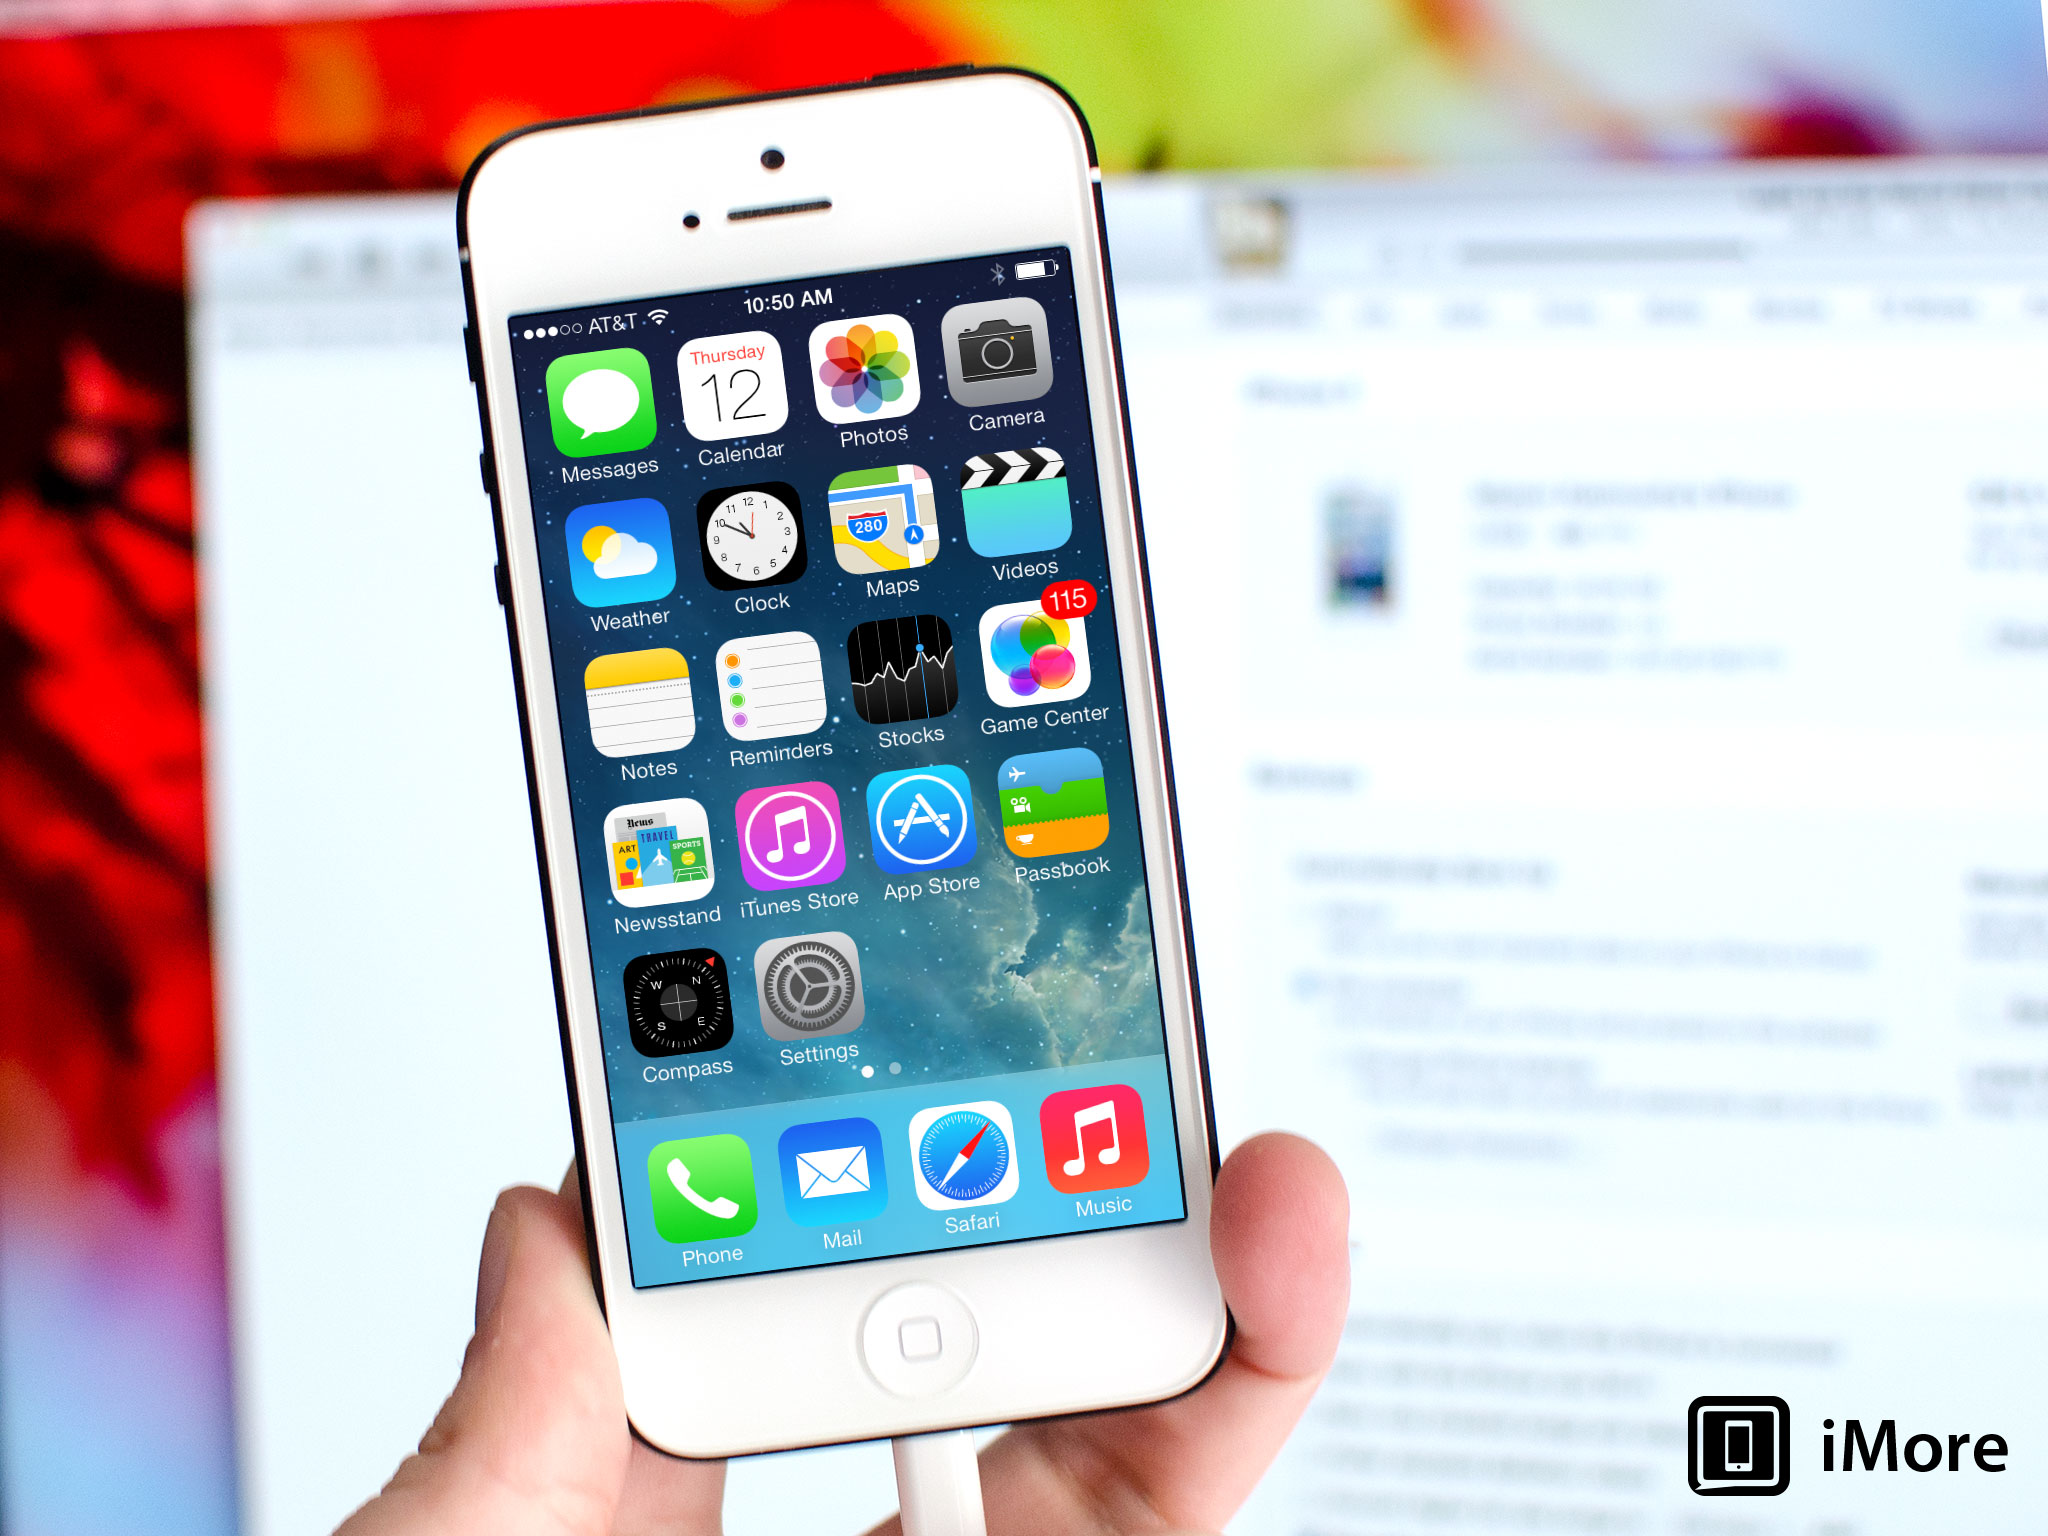 How to update your iPhone or iPad to iOS 7 using iTunes